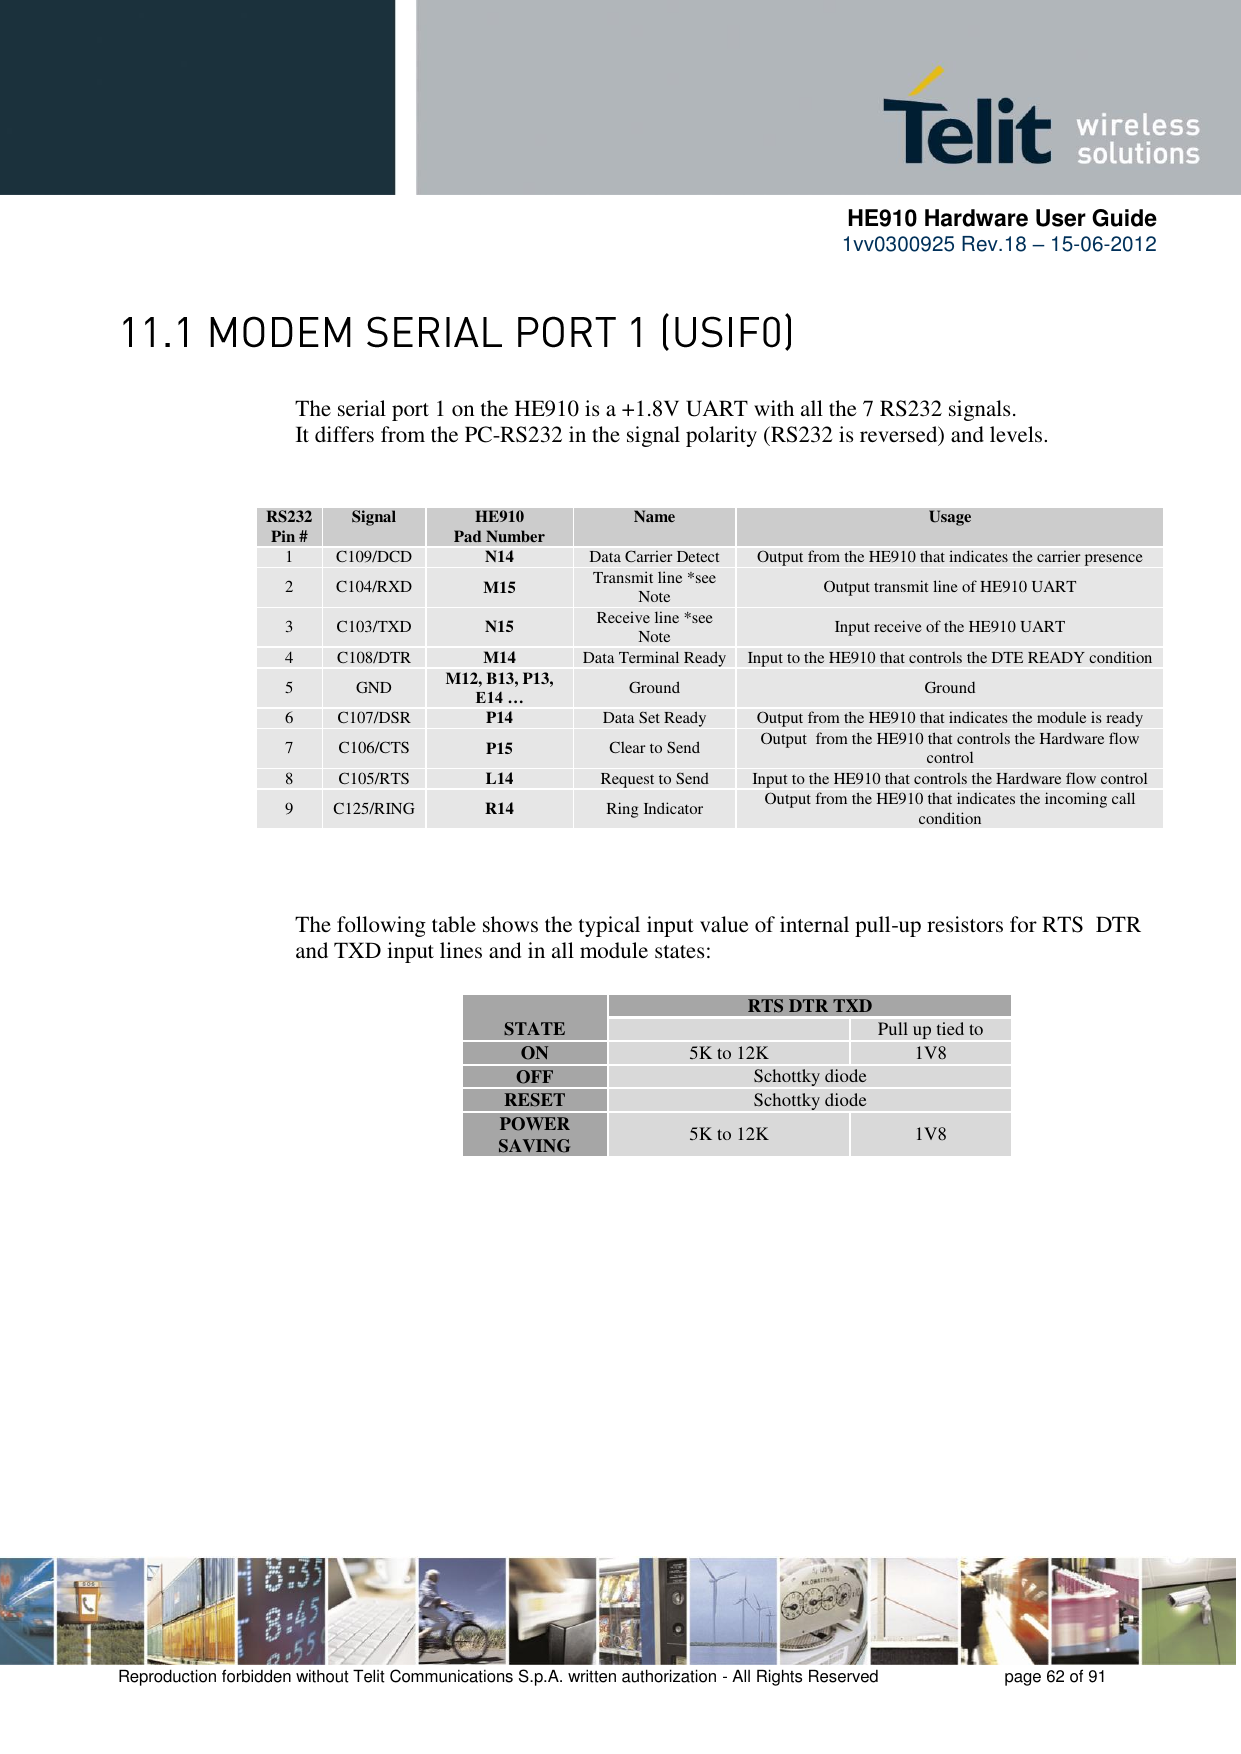      HE910 Hardware User Guide 1vv0300925 Rev.18 – 15-06-2012    Reproduction forbidden without Telit Communications S.p.A. written authorization - All Rights Reserved    page 62 of 91   The serial port 1 on the HE910 is a +1.8V UART with all the 7 RS232 signals.      It differs from the PC-RS232 in the signal polarity (RS232 is reversed) and levels. RS232 Pin # Signal HE910 Pad Number Name Usage 1 C109/DCD N14 Data Carrier Detect Output from the HE910 that indicates the carrier presence 2 C104/RXD M15 Transmit line *see Note Output transmit line of HE910 UART 3 C103/TXD N15 Receive line *see Note Input receive of the HE910 UART 4 C108/DTR M14 Data Terminal Ready Input to the HE910 that controls the DTE READY condition 5 GND M12, B13, P13, E14 … Ground Ground 6 C107/DSR P14 Data Set Ready Output from the HE910 that indicates the module is ready 7 C106/CTS P15 Clear to Send Output  from the HE910 that controls the Hardware flow control 8 C105/RTS L14 Request to Send Input to the HE910 that controls the Hardware flow control 9 C125/RING R14 Ring Indicator Output from the HE910 that indicates the incoming call condition   The following table shows the typical input value of internal pull-up resistors for RTS  DTR and TXD input lines and in all module states:  STATE RTS DTR TXD  Pull up tied to ON 5K to 12K 1V8 OFF Schottky diode RESET Schottky diode POWER SAVING 5K to 12K 1V8 